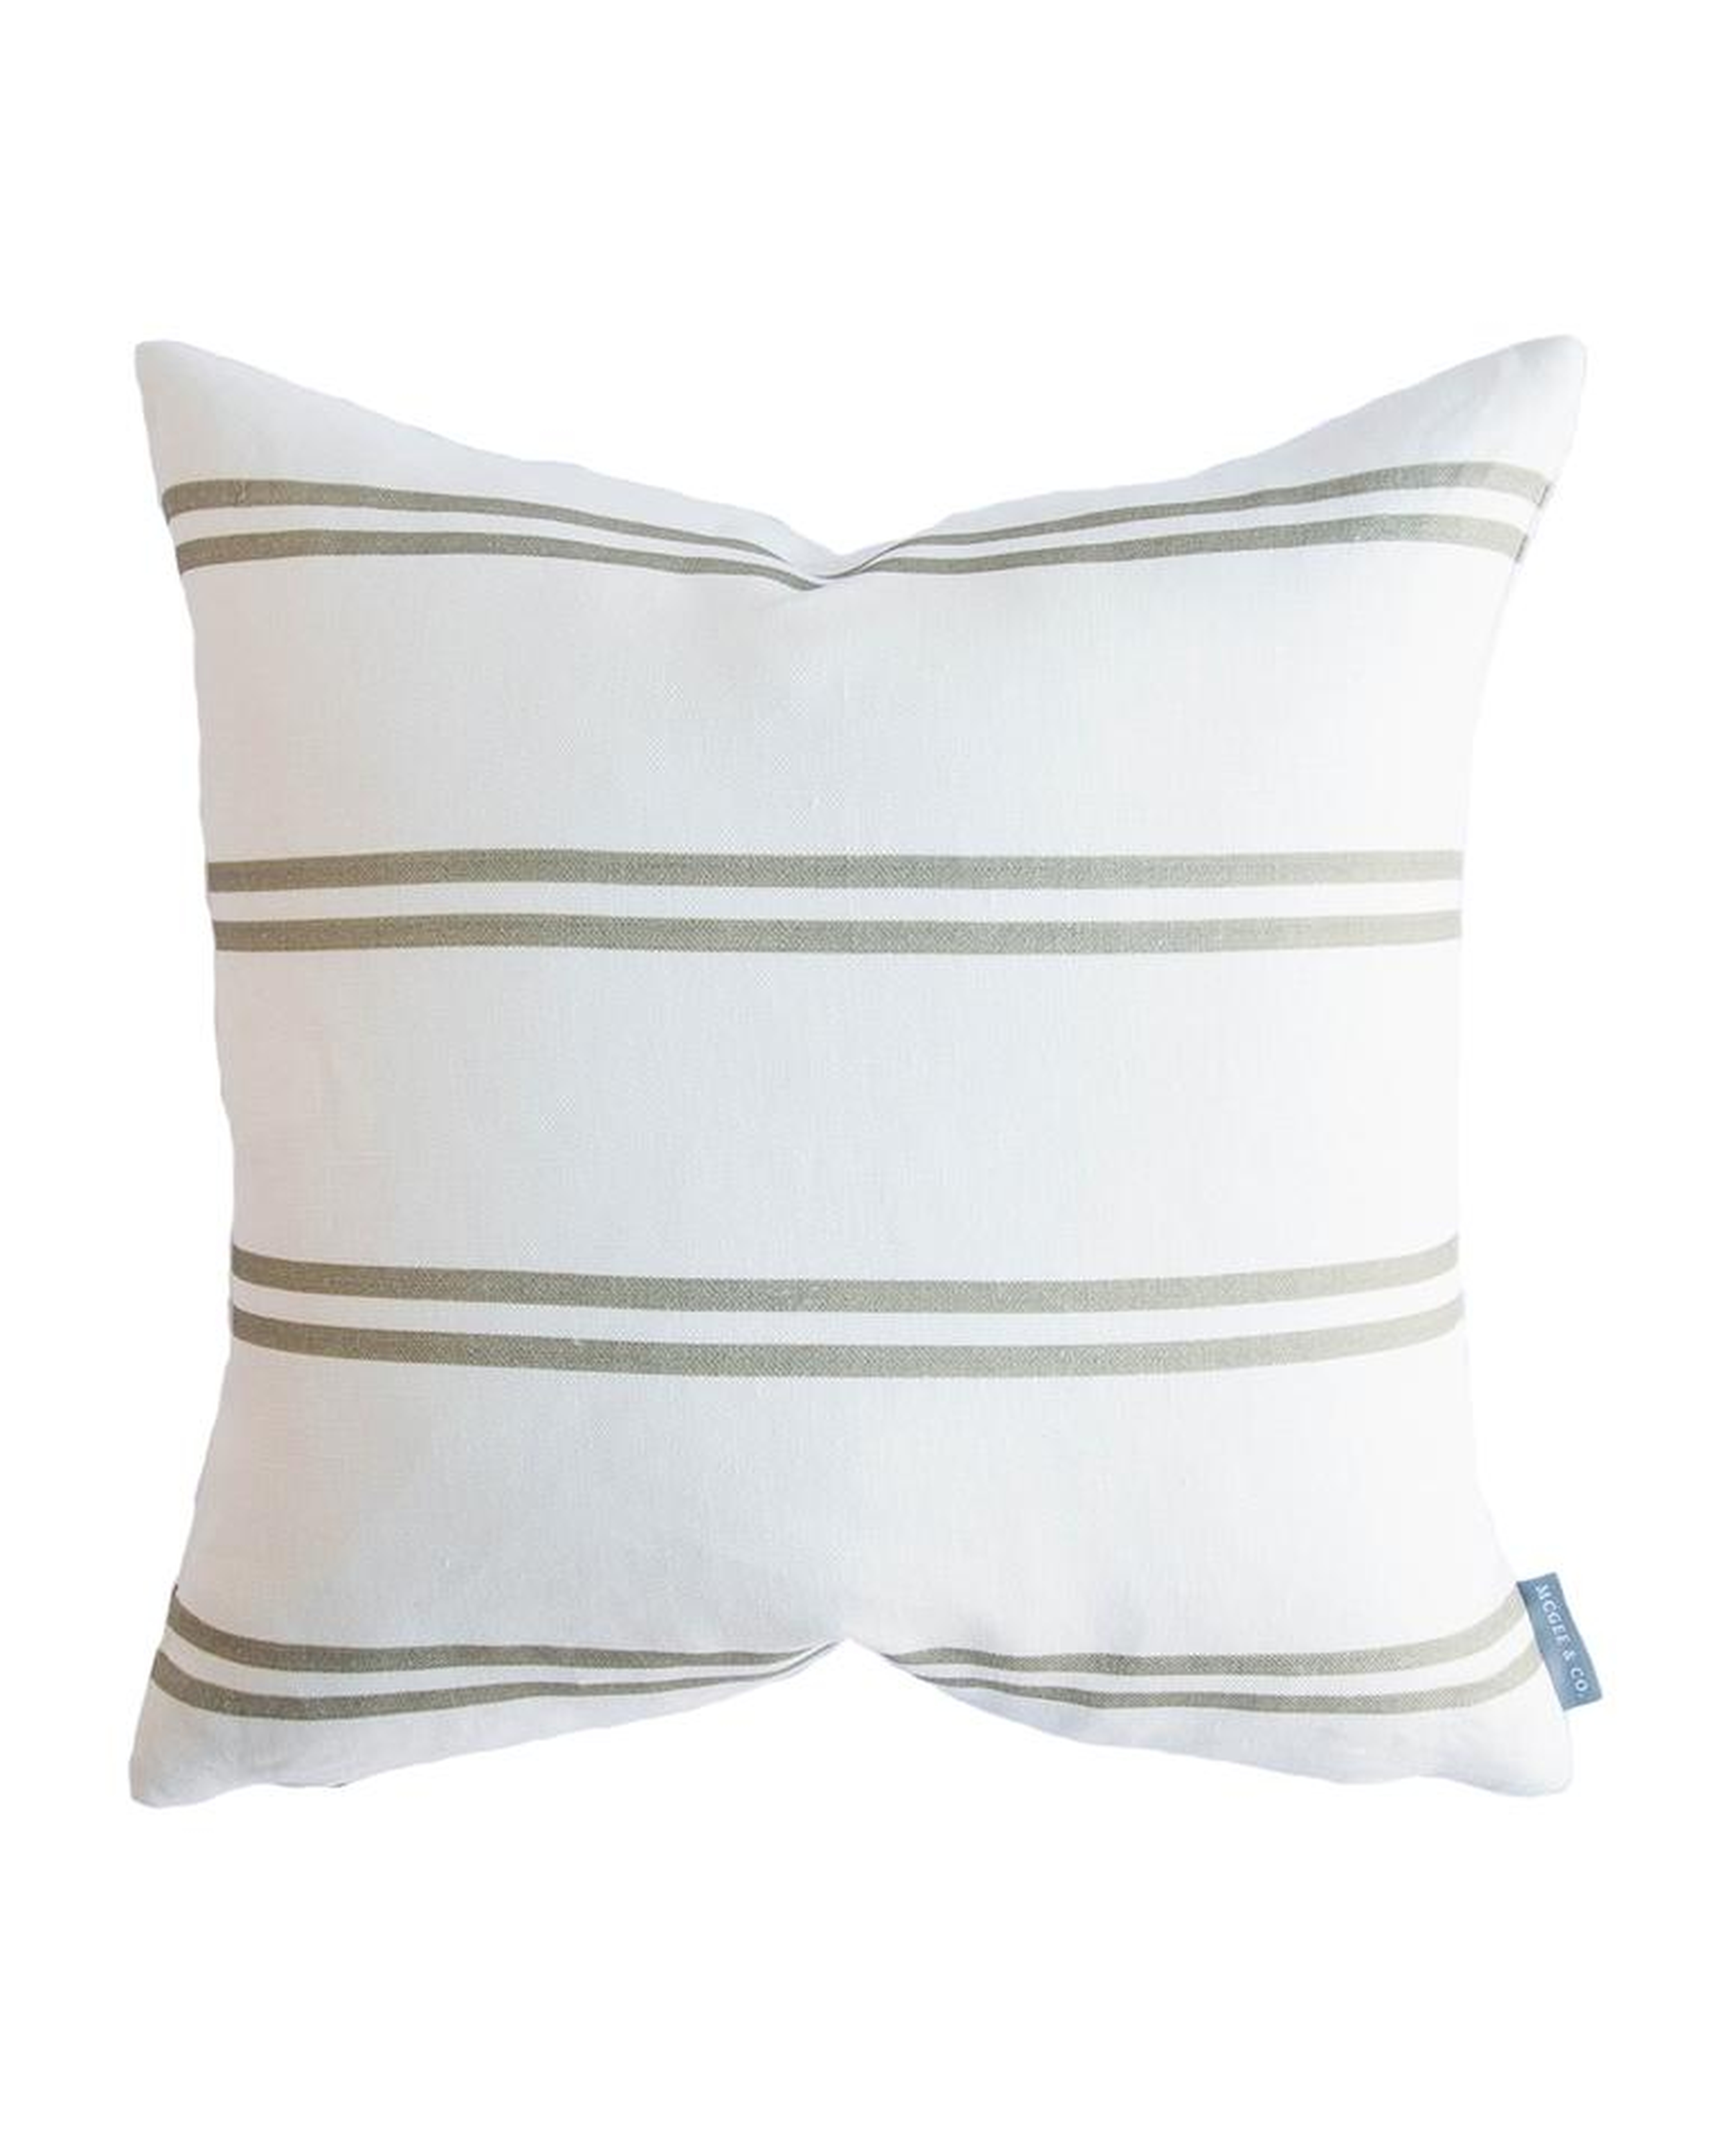 FRANKLIN OLIVE STRIPE PILLOW WITHOUT INSERT, 20" x 20" - McGee & Co.